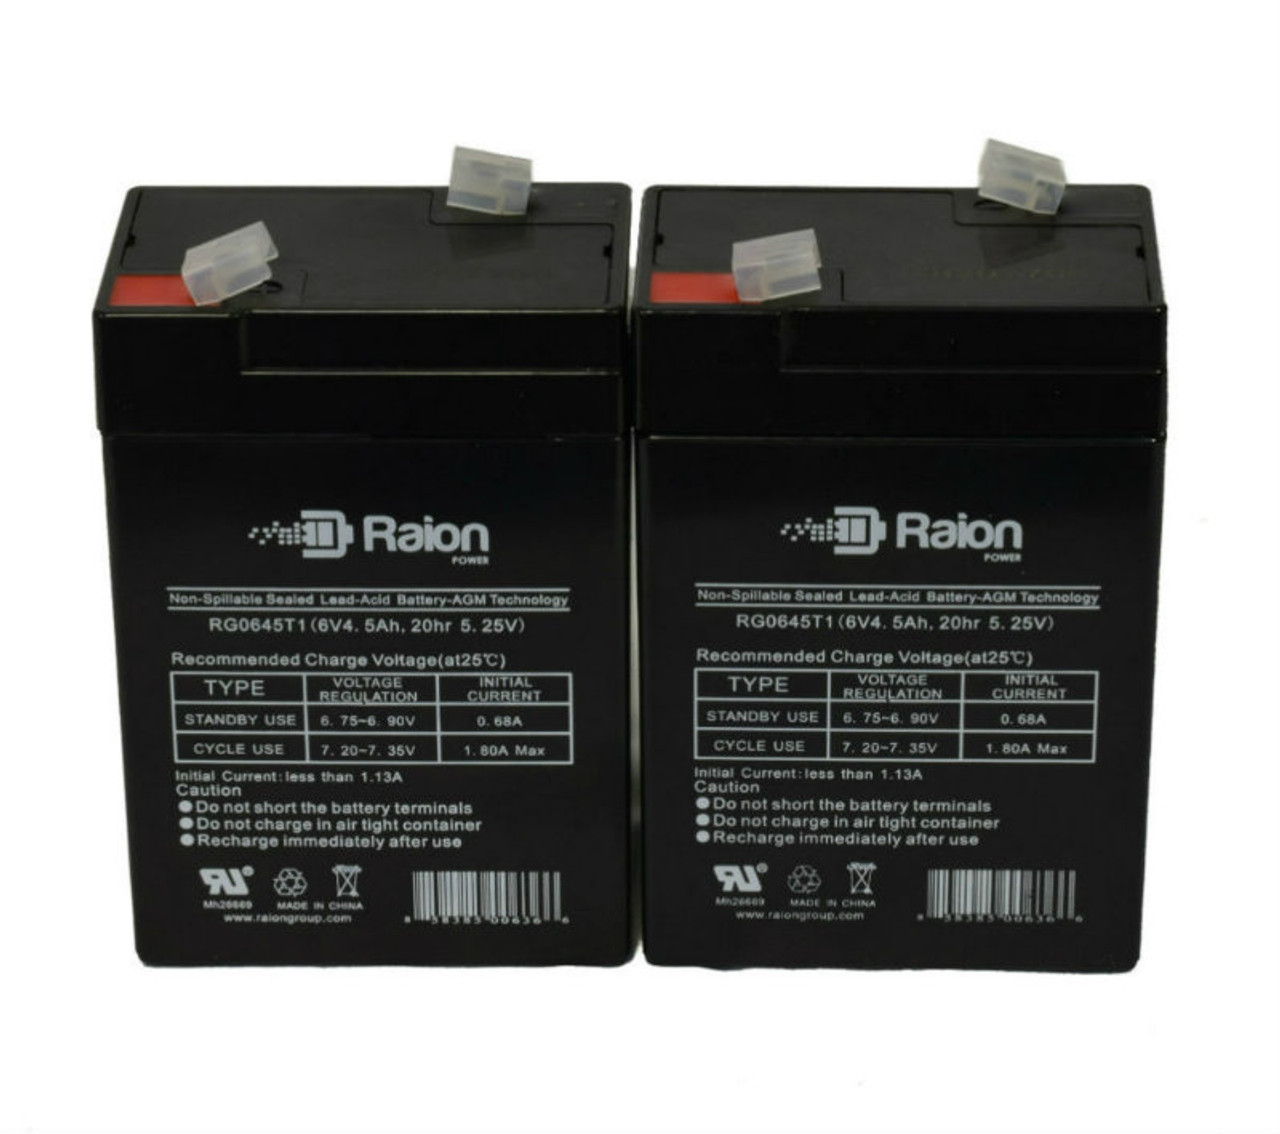 Raion Power RG0645T1 6V 4.5Ah Replacement Medical Equipment Battery for Protocol Systems 300 - 2 Pack